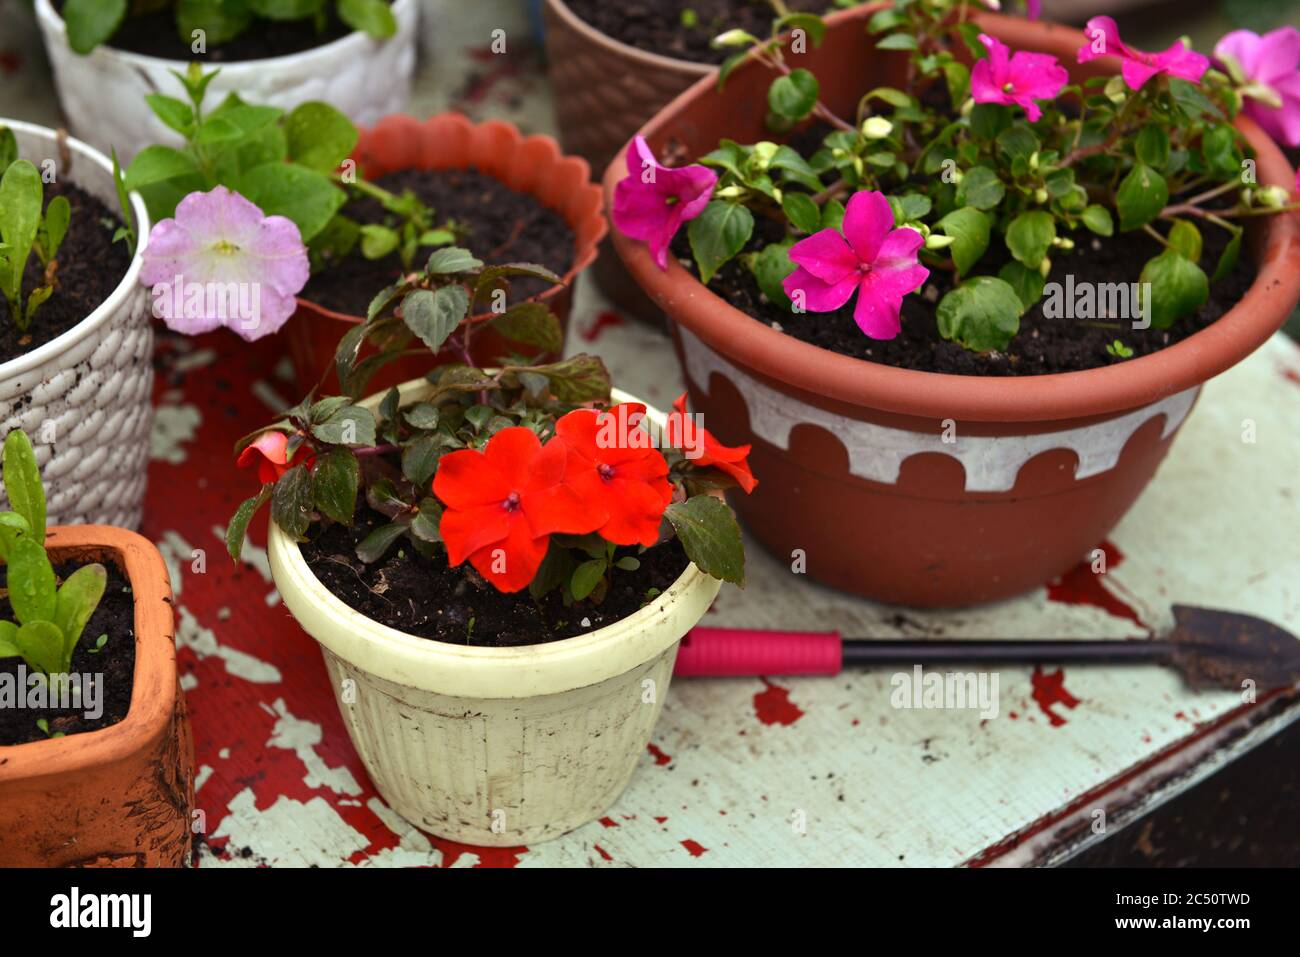 Flower pots with red and lilac balsamine, shovel on table in the garden. Vintage botanical background with plants, home hobby still life with gardenin Stock Photo